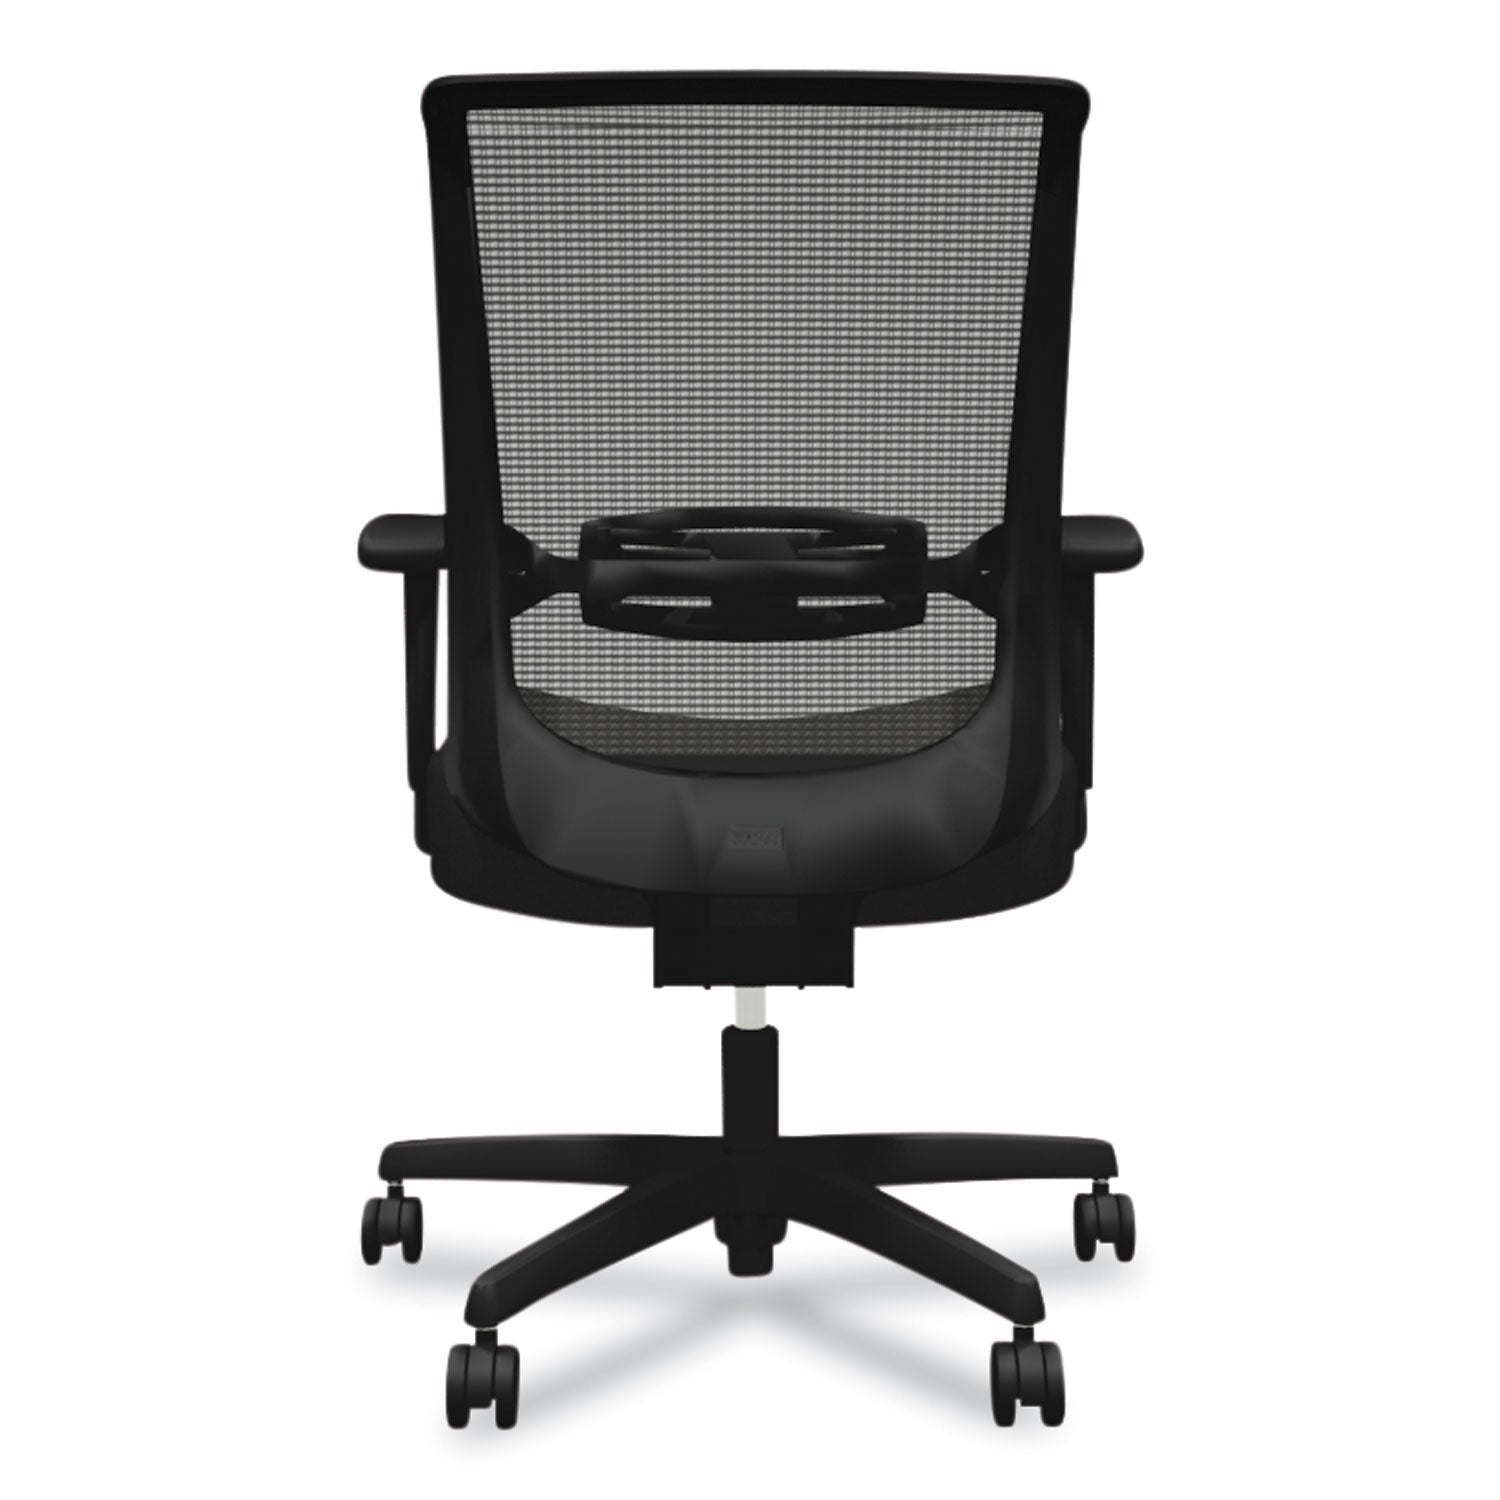 convergence-mid-back-task-chair-swivel-tilt-supports-up-to-275-lb-1575-to-2013-seat-height-black_honcms1aaccf10 - 4